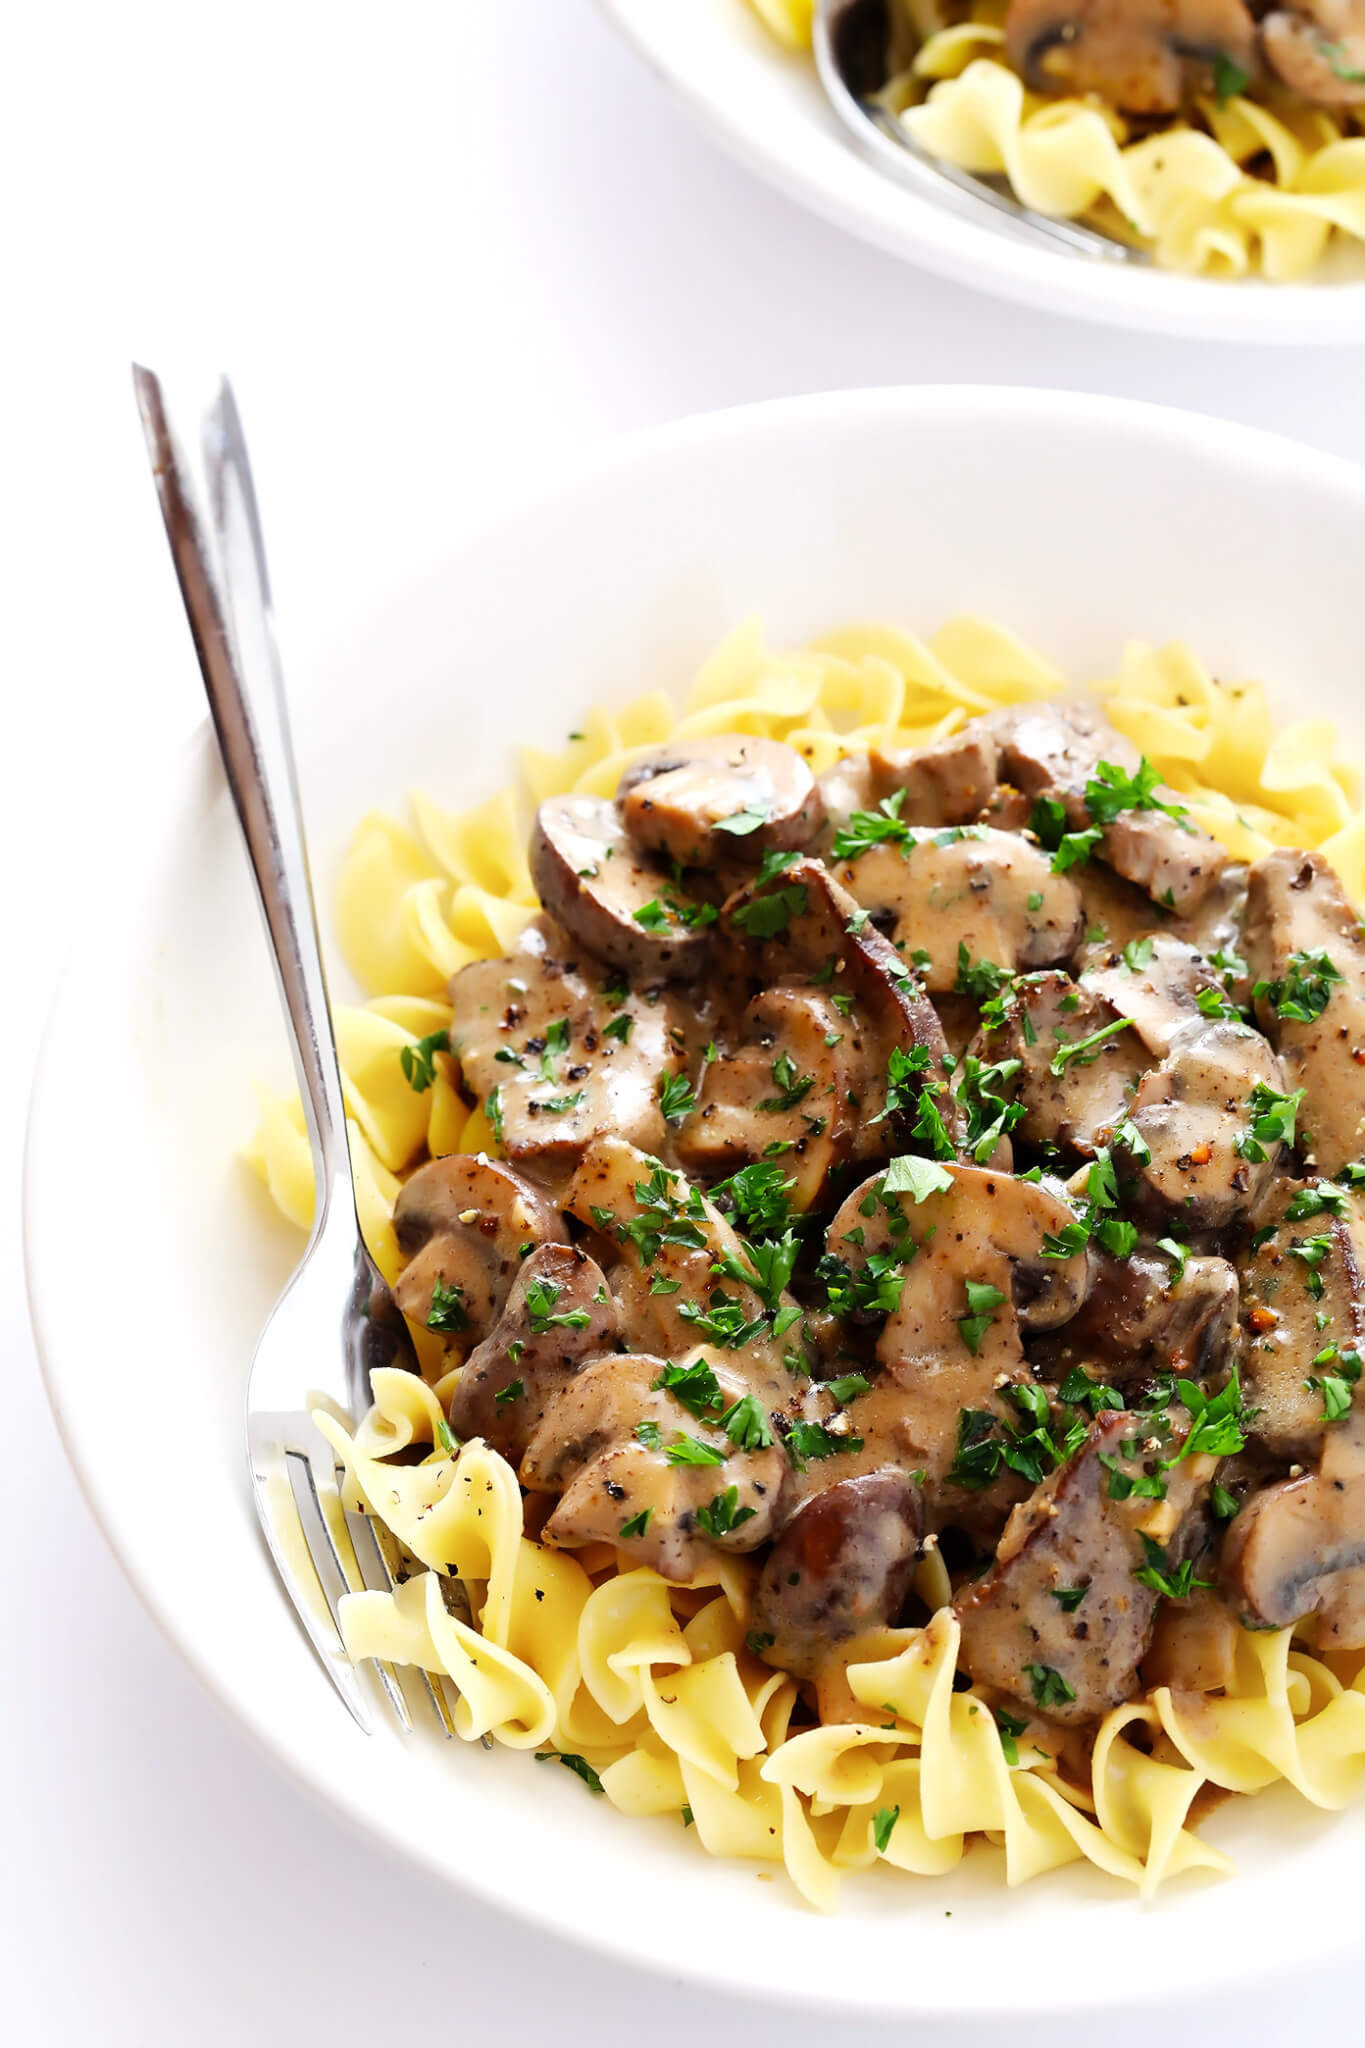 Easy Beef And Noodles Recipe Stovetop
 Beef Stroganoff